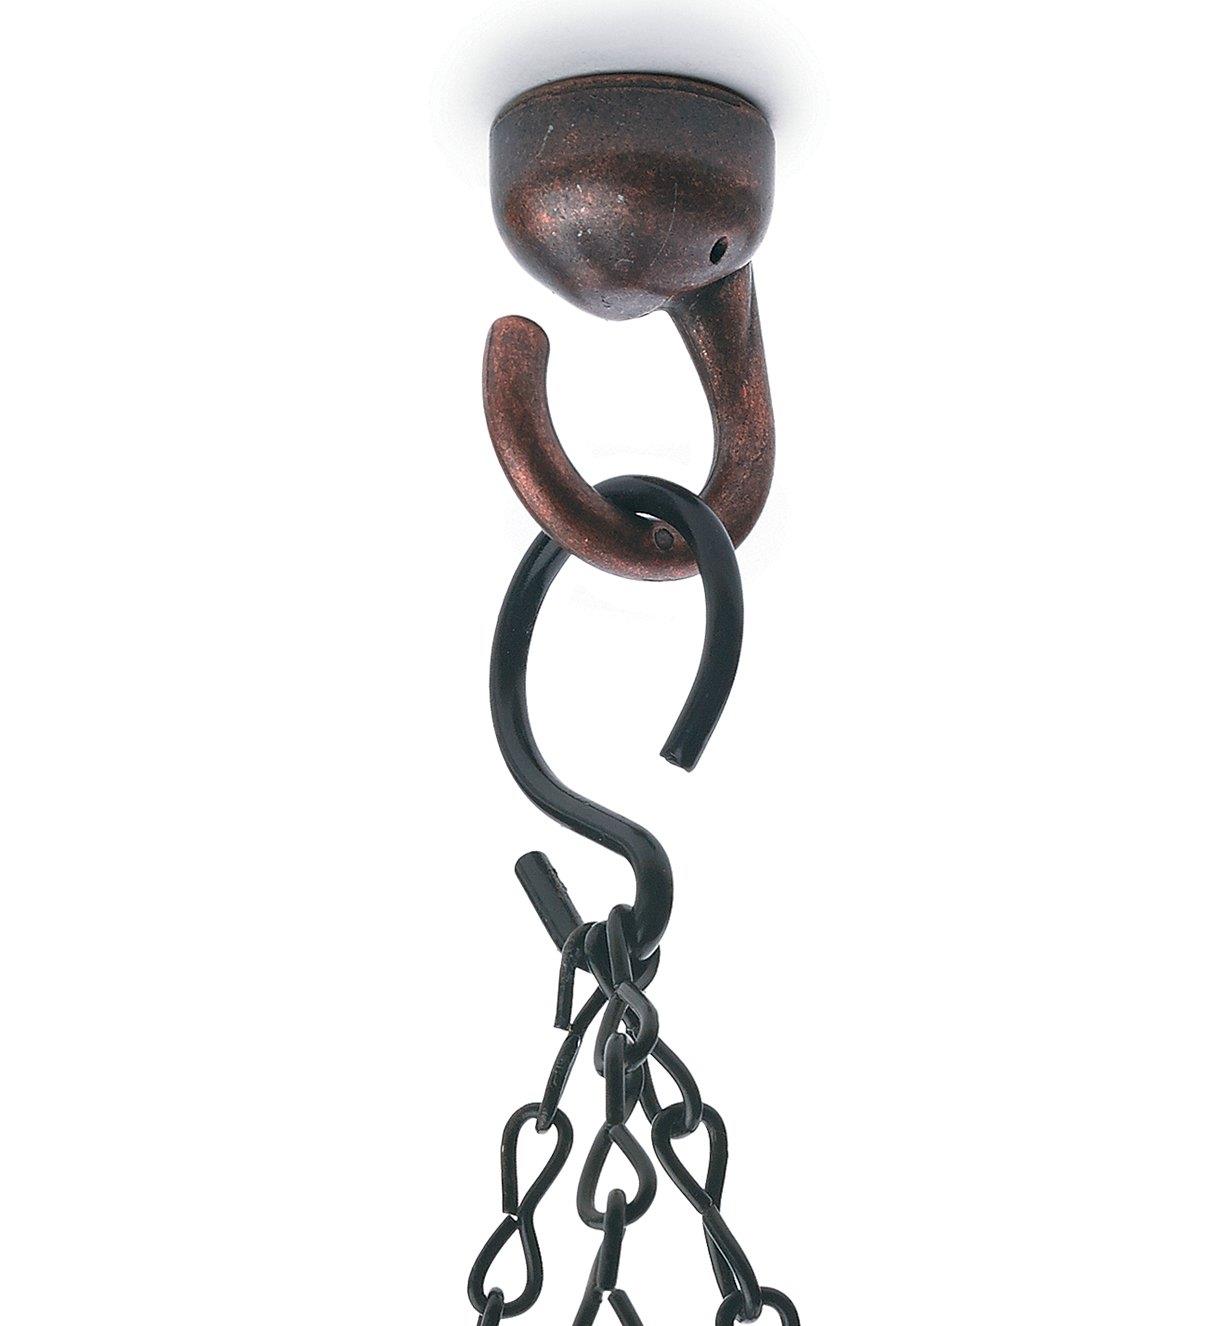 A hook holding three chains hanging from an installed Bronze Elephant Ceiling Hook